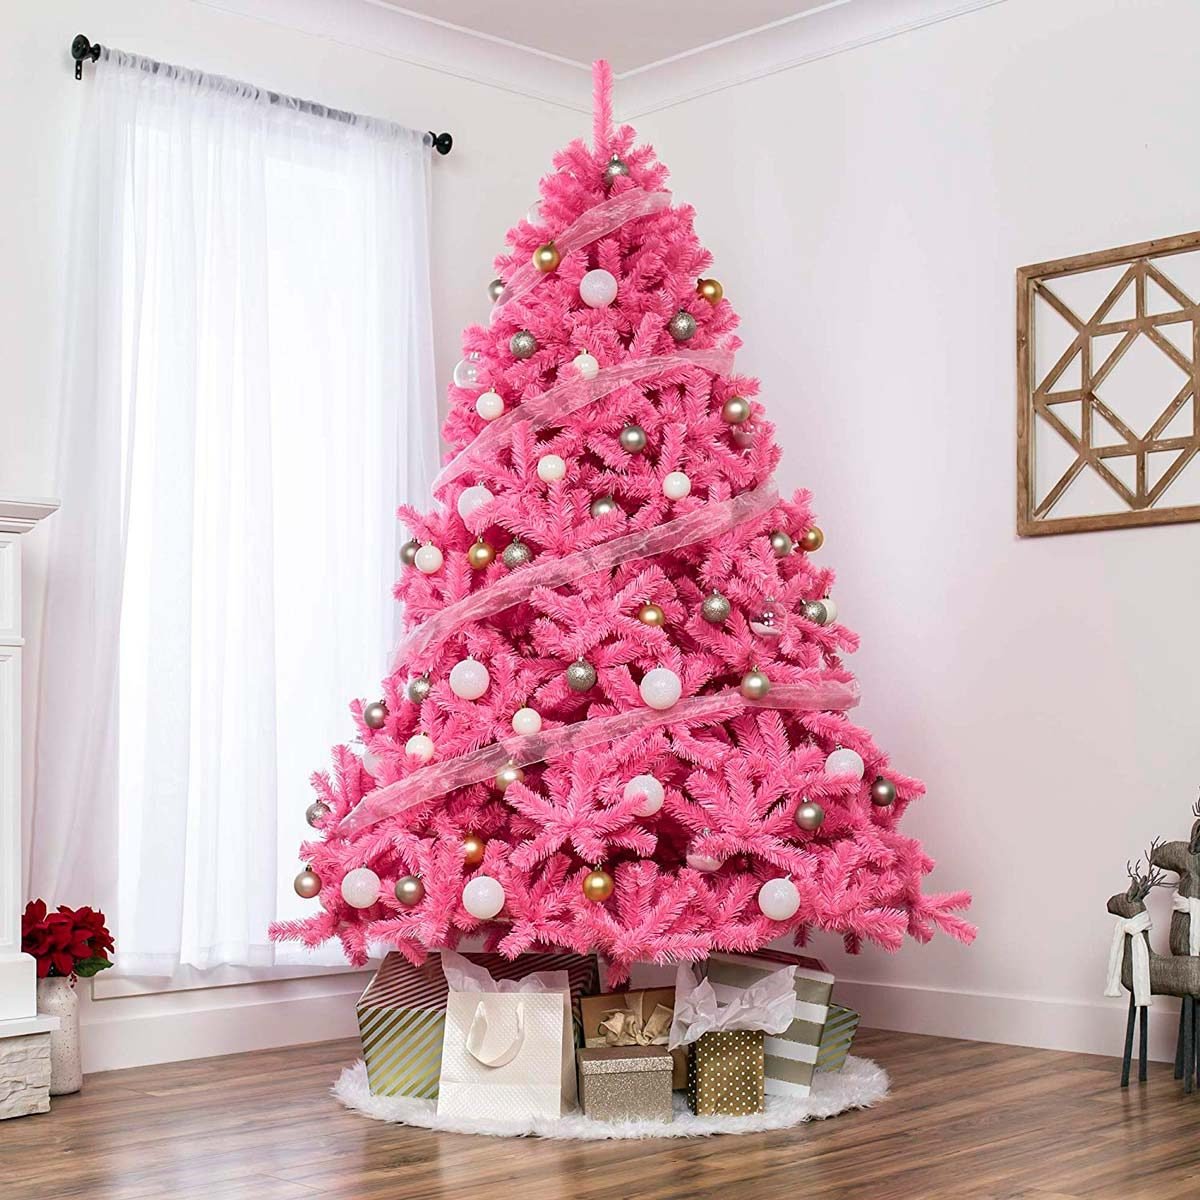 9 Pink Christmas Trees That\'ll Make You Rethink Holiday Traditions